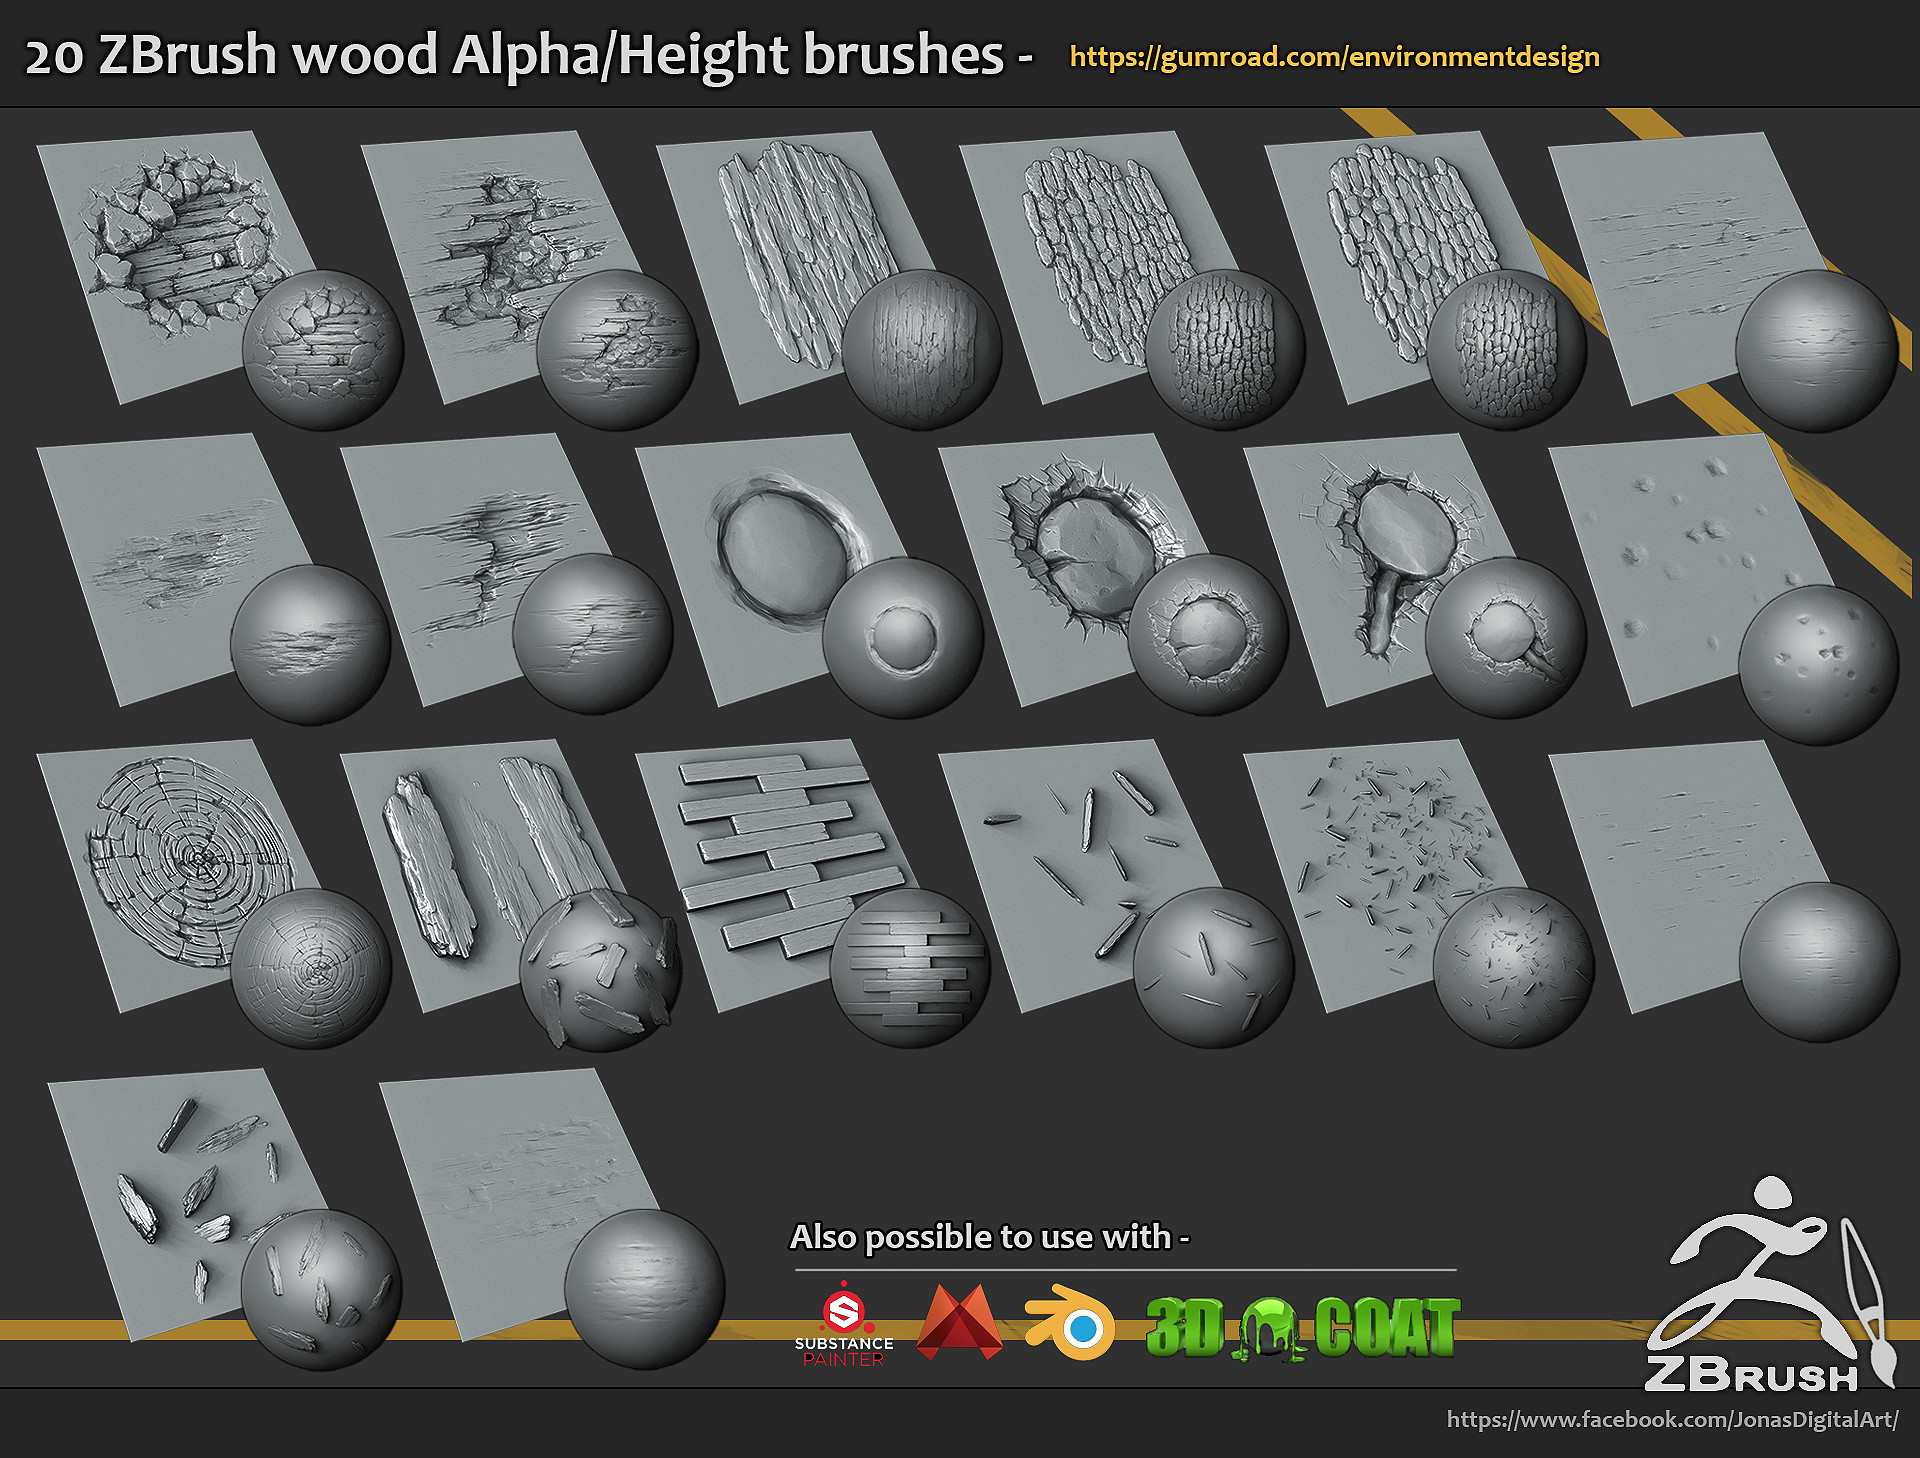 zbrush as a tool for illustration